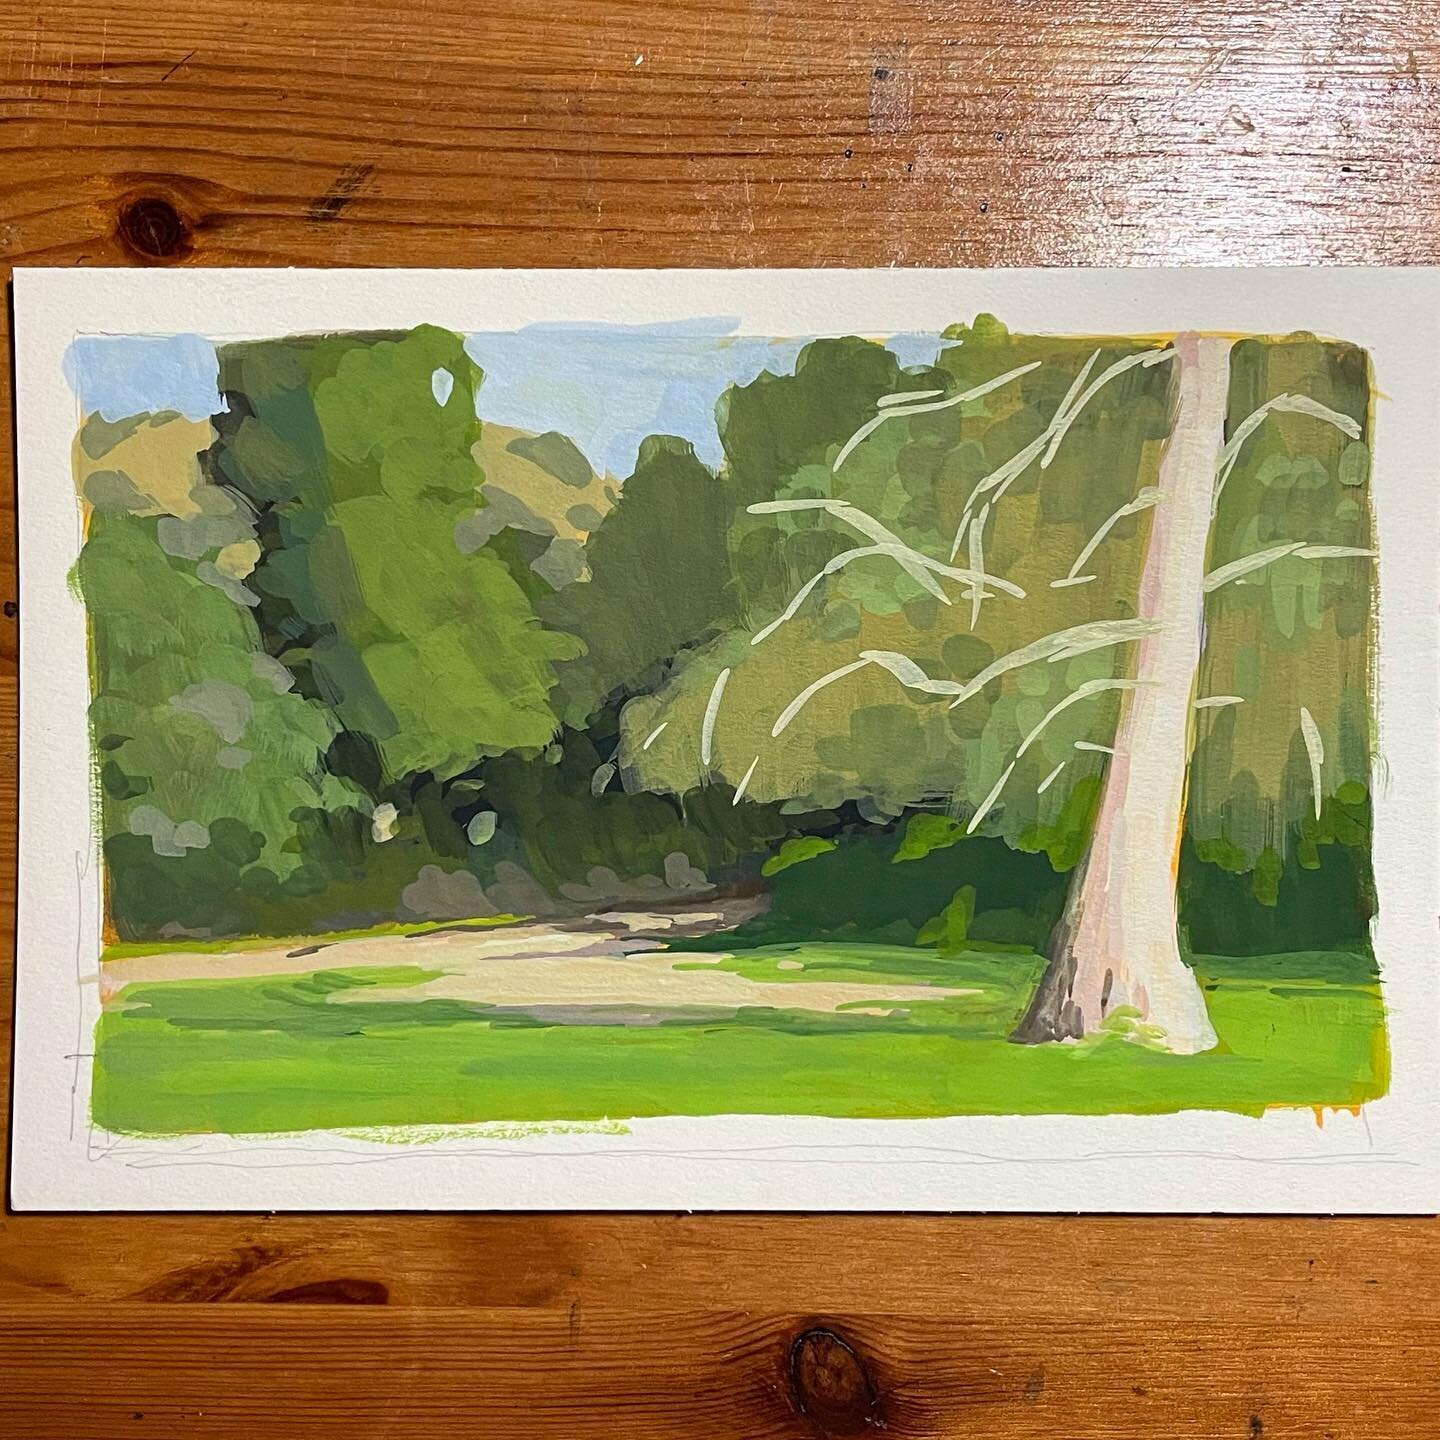 #pleinairpril day 17 from forrest lawn. #hiking #pleinair #painting #pleinairpainting #gouache #painterofaight